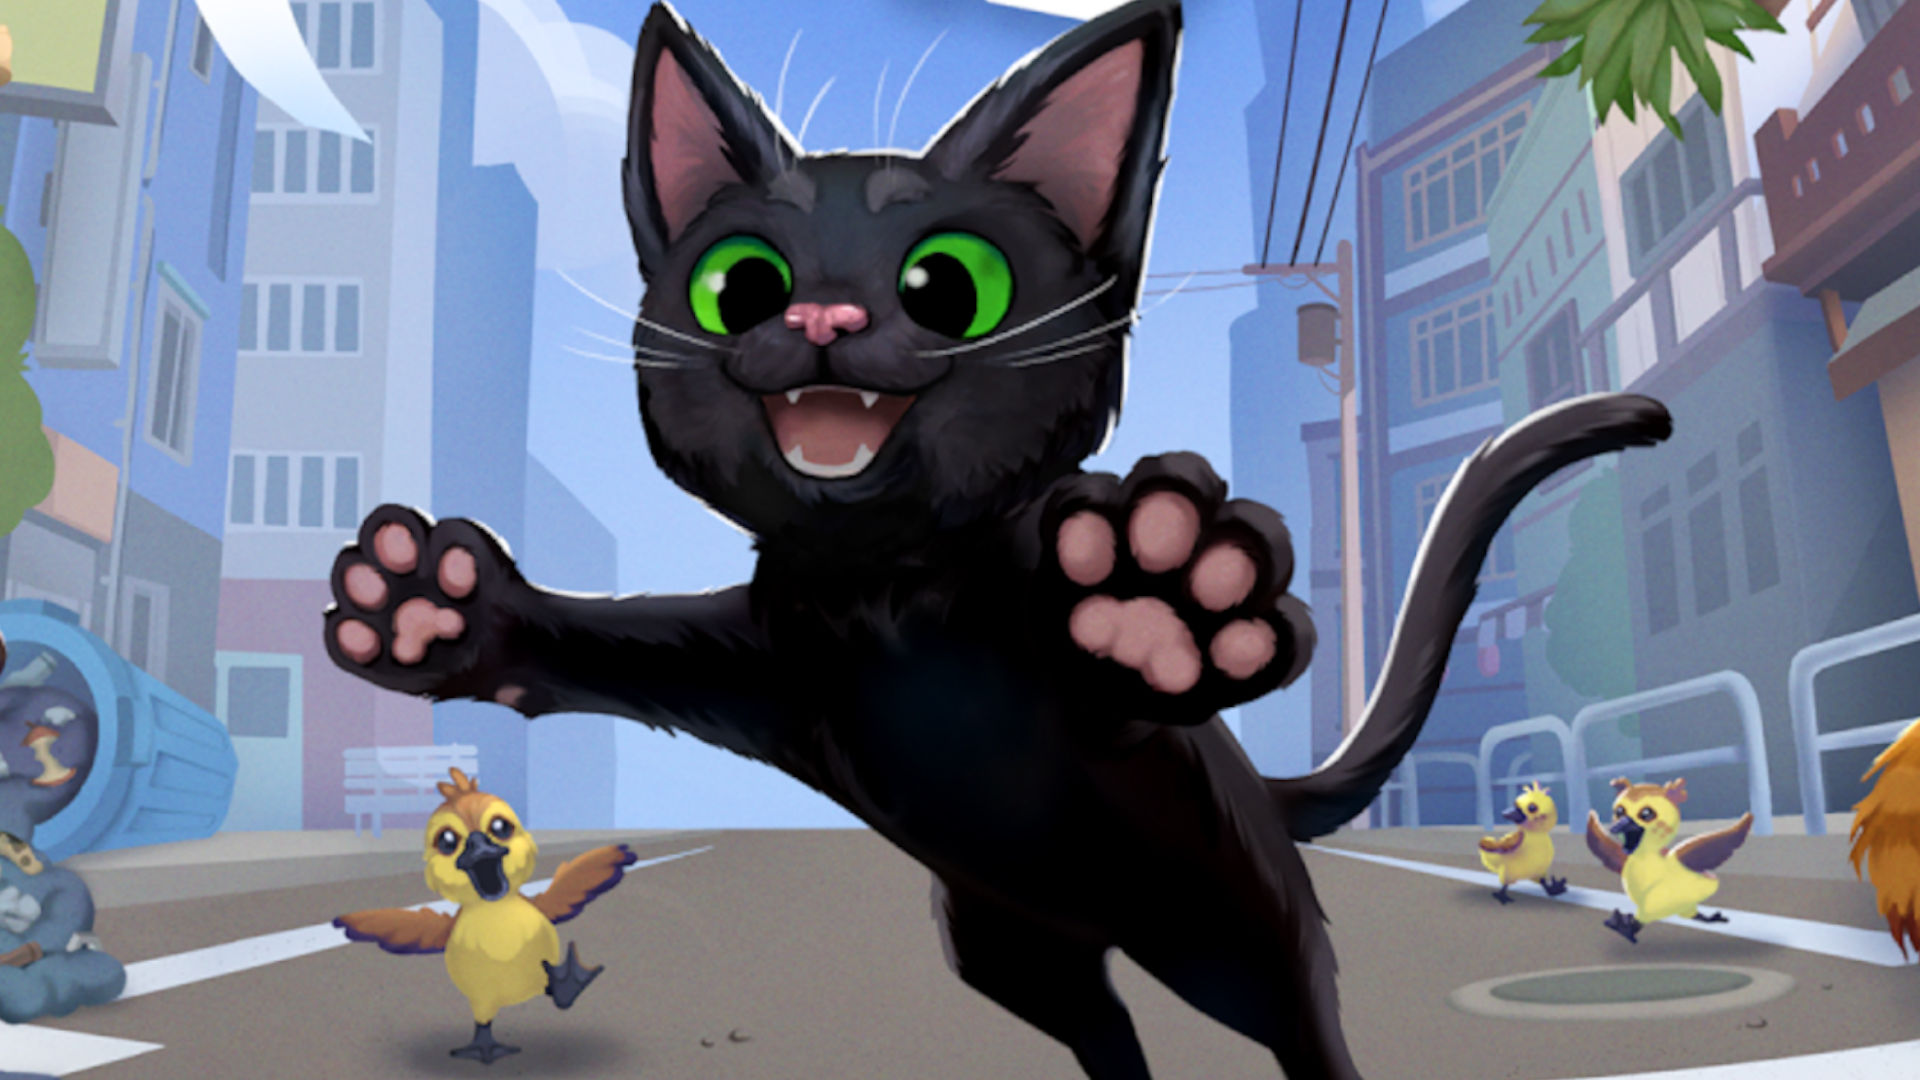 Promotional art of Little Kitty, Big City showing a black cat pouncing